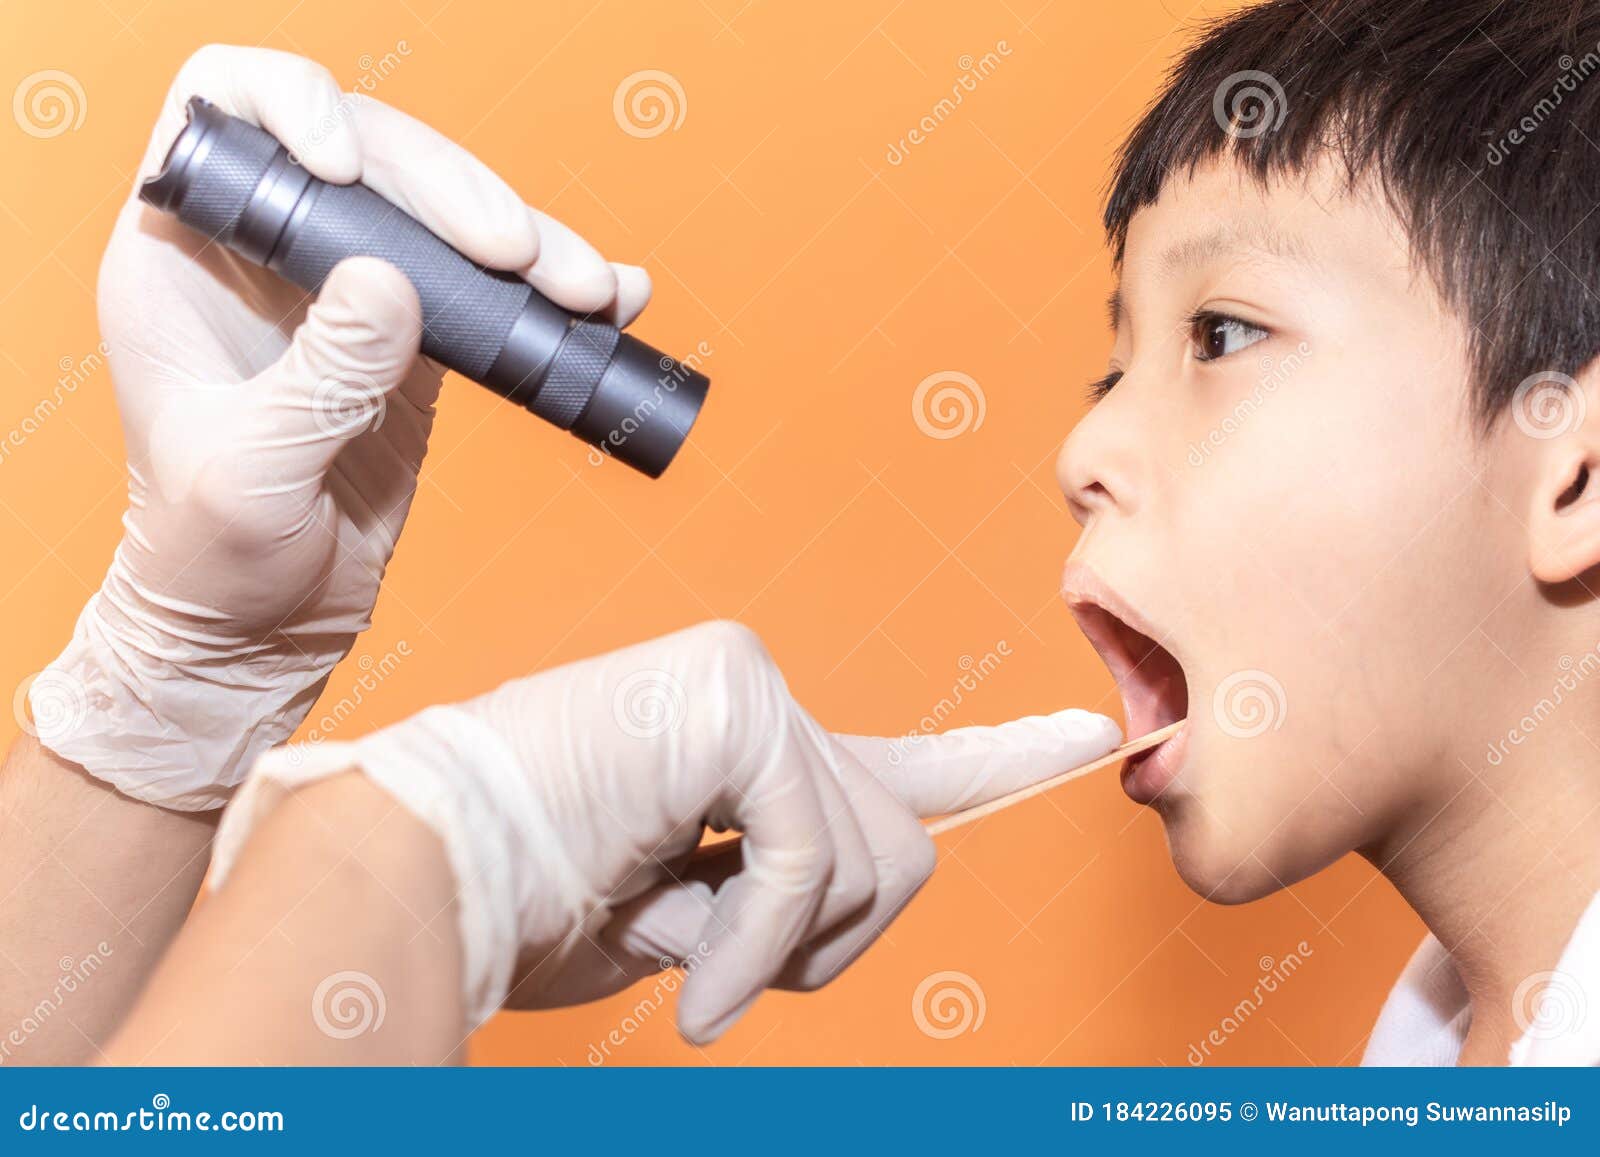 close up doctor examining throat of patient with tongue depressor